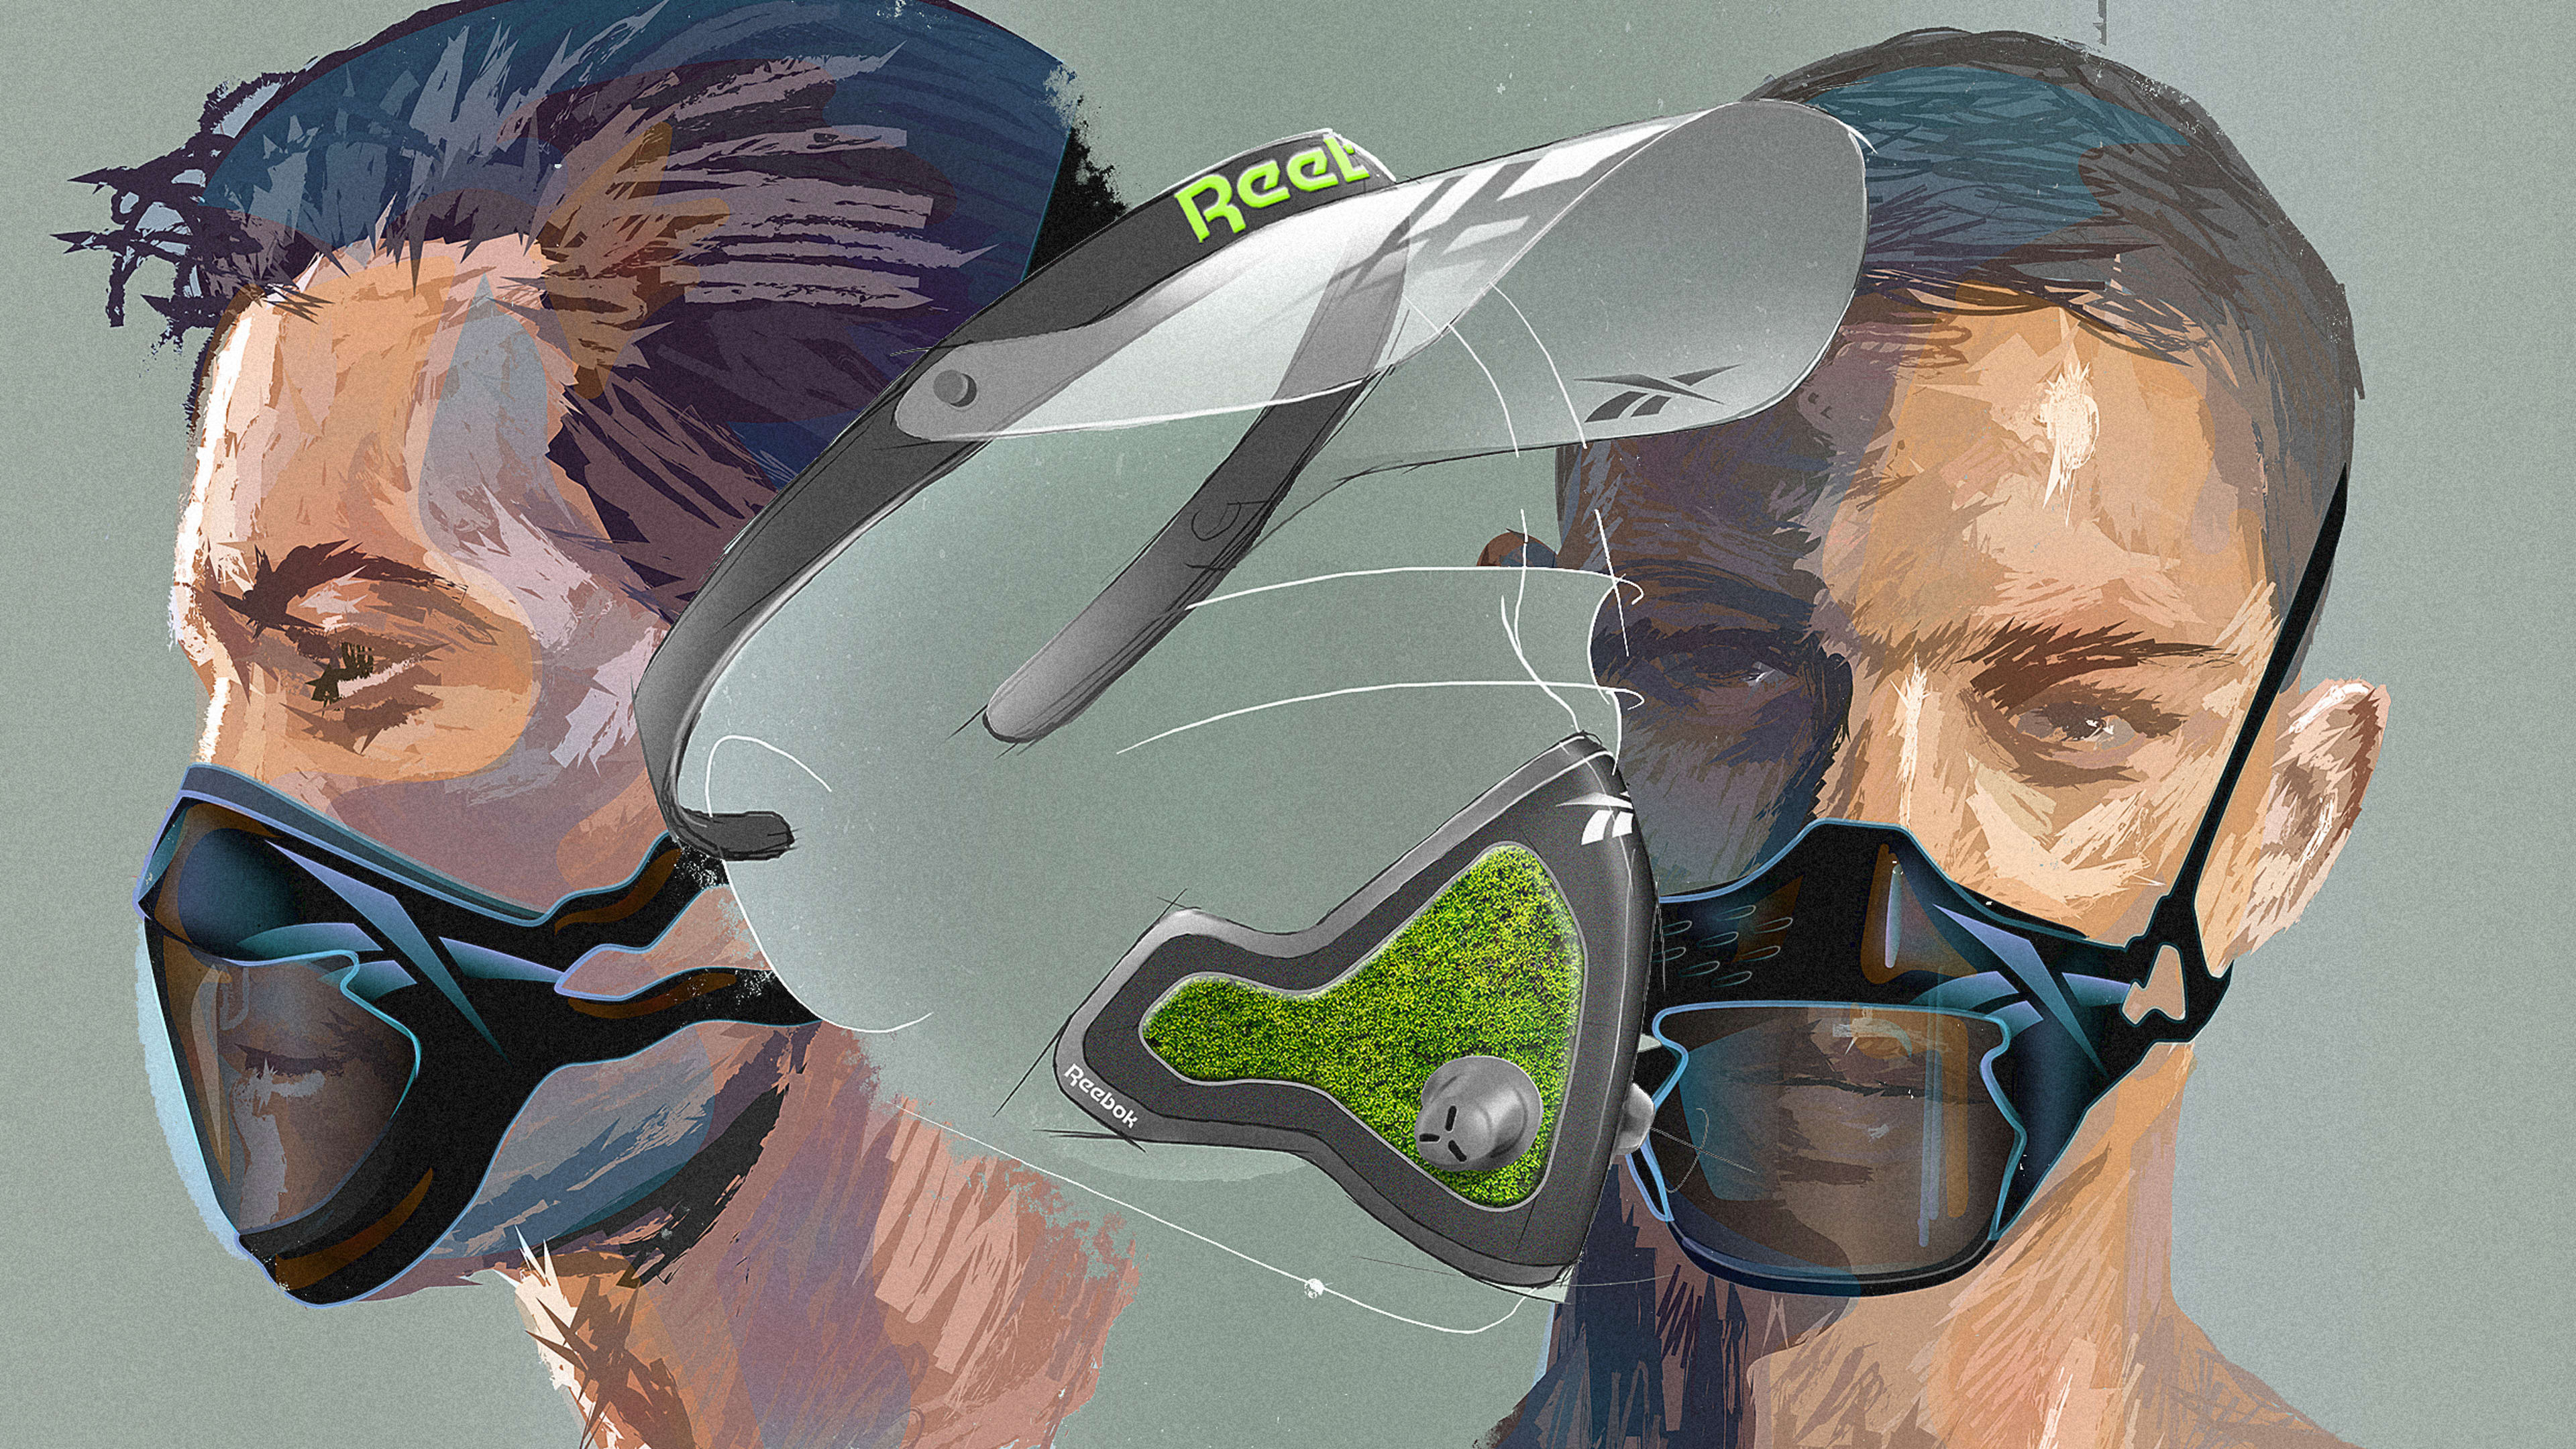 Reebok’s fitness masks point to an even more dystopian future